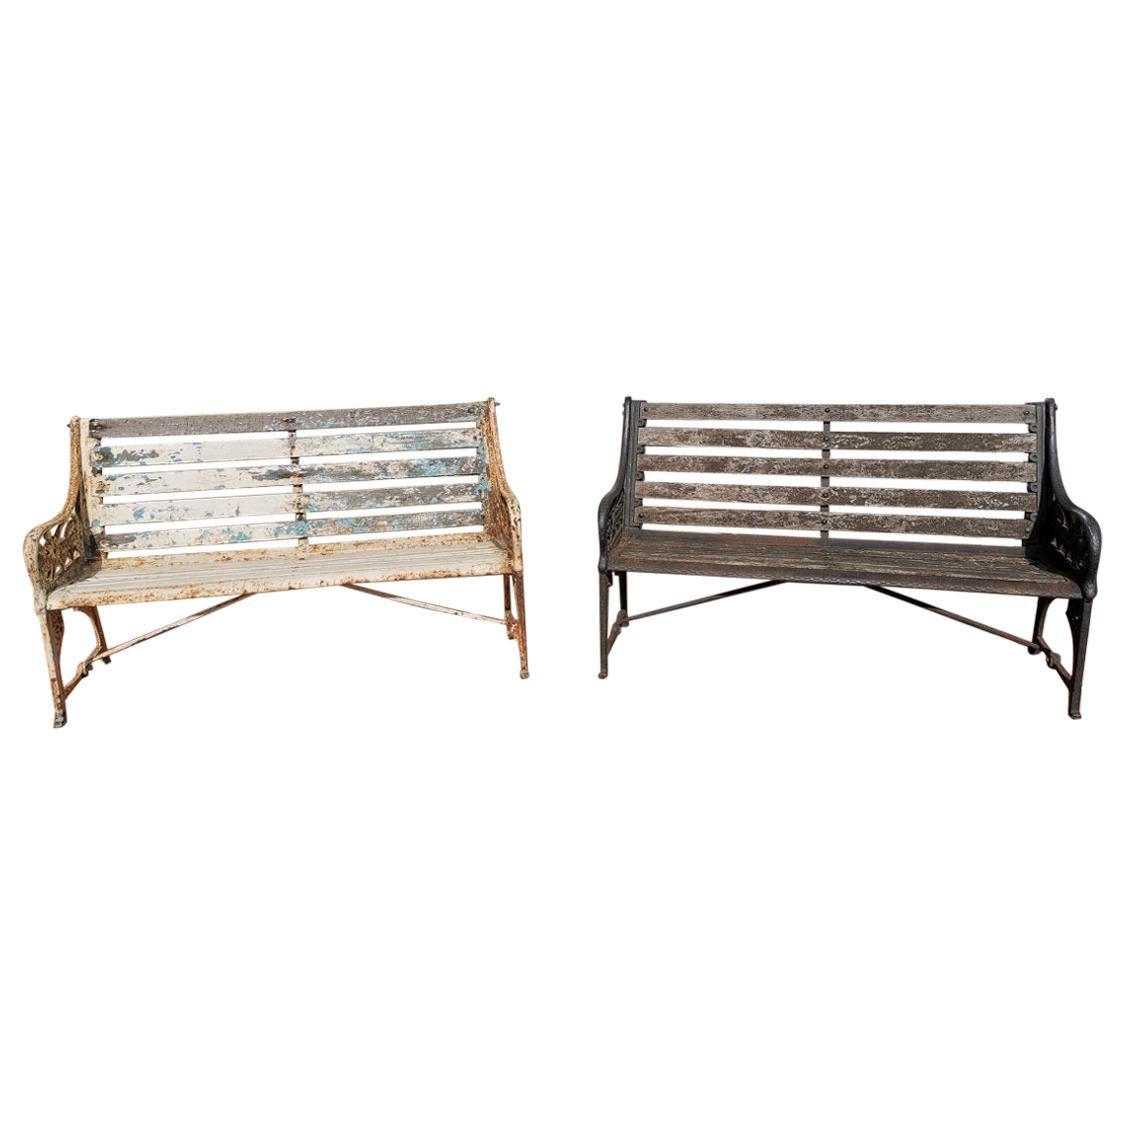 Dr C Dresser for Coalbrookdale Two ‘Medieval’ Pattern Cast Iron Garden Benches For Sale